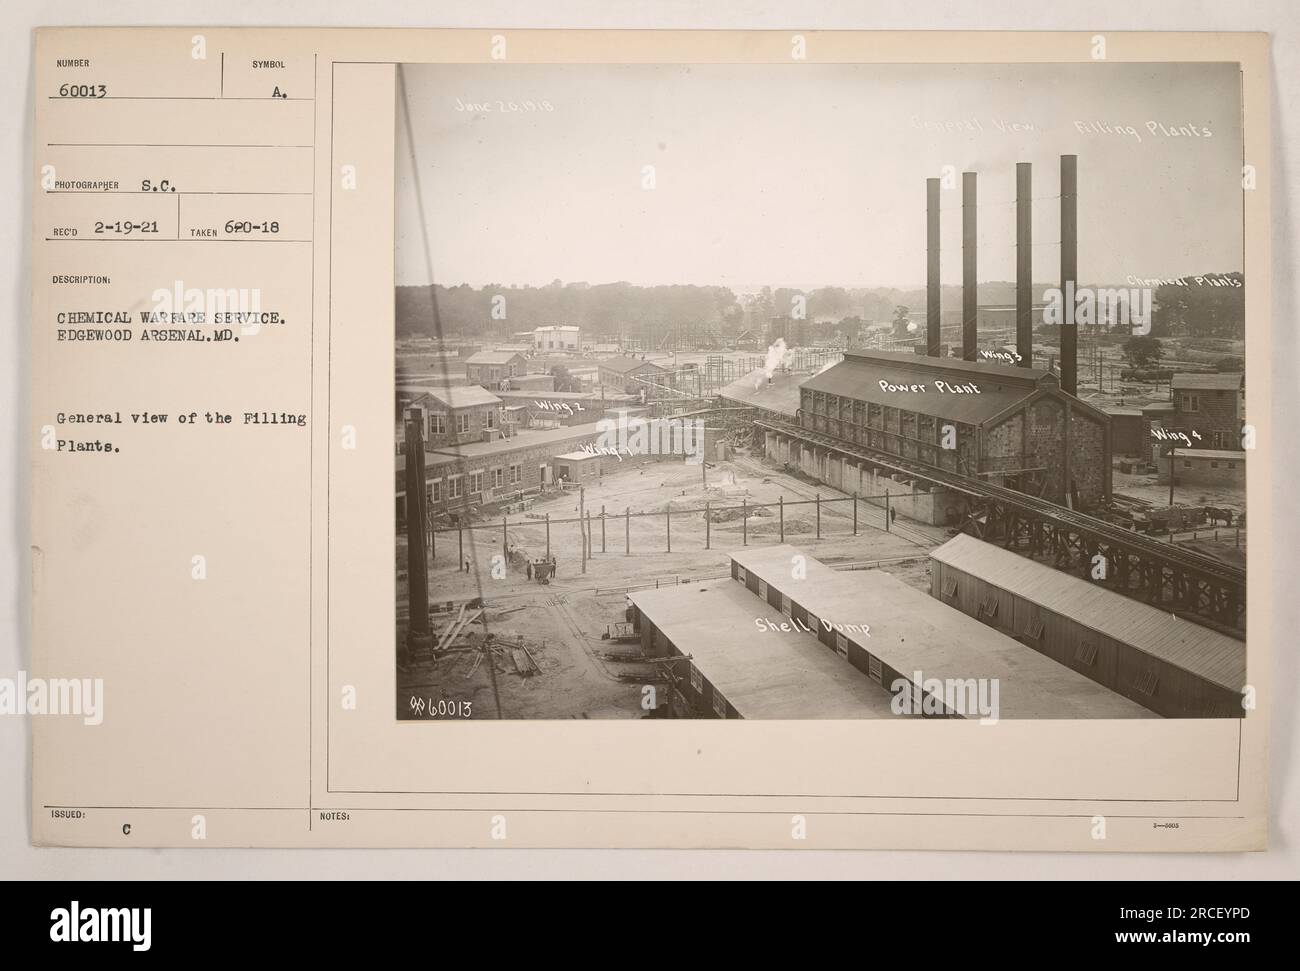 'General view of the Filling Plants at Edgewood Arsenal, Maryland, operated by the Chemical Warfare Service. This photograph, taken on June 20, 1918, shows the Filling Plants in operation, with a shell pump power plant in the foreground. Photographer: S.C. Description: Issued Symbol A. Chemical Warfare Service. Edgewood Arsenal, MD.' Stock Photo